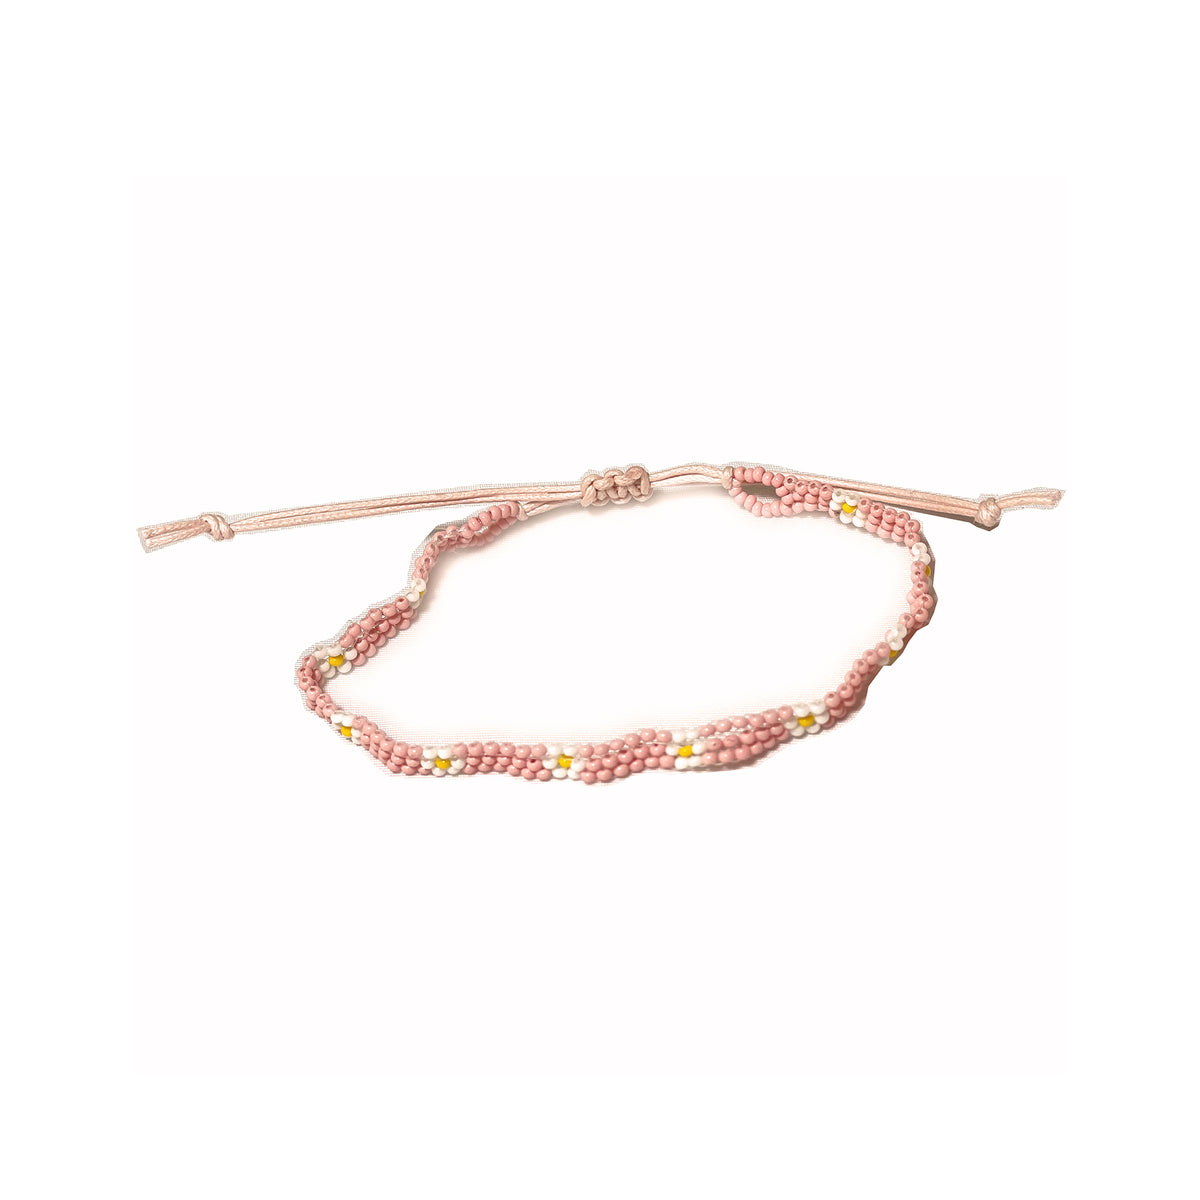 Colorful Handmade Seed Bead Daisy Anklet